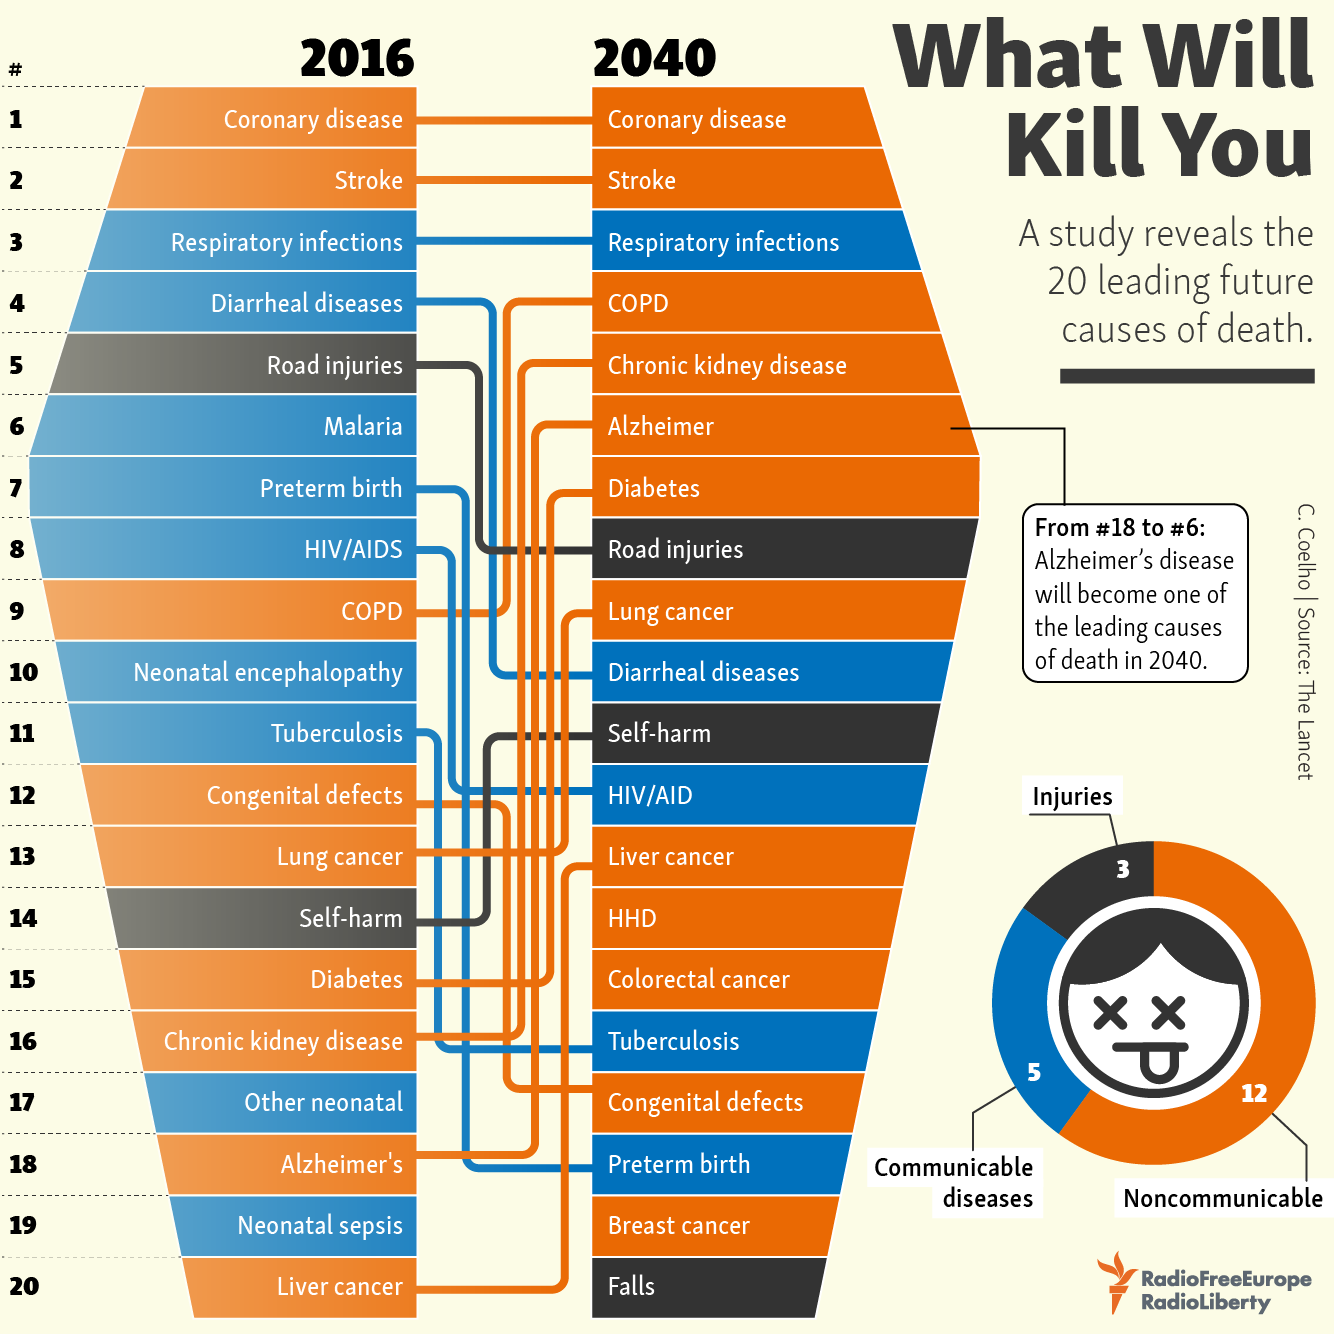 What Will Kill You in 2040 infographic